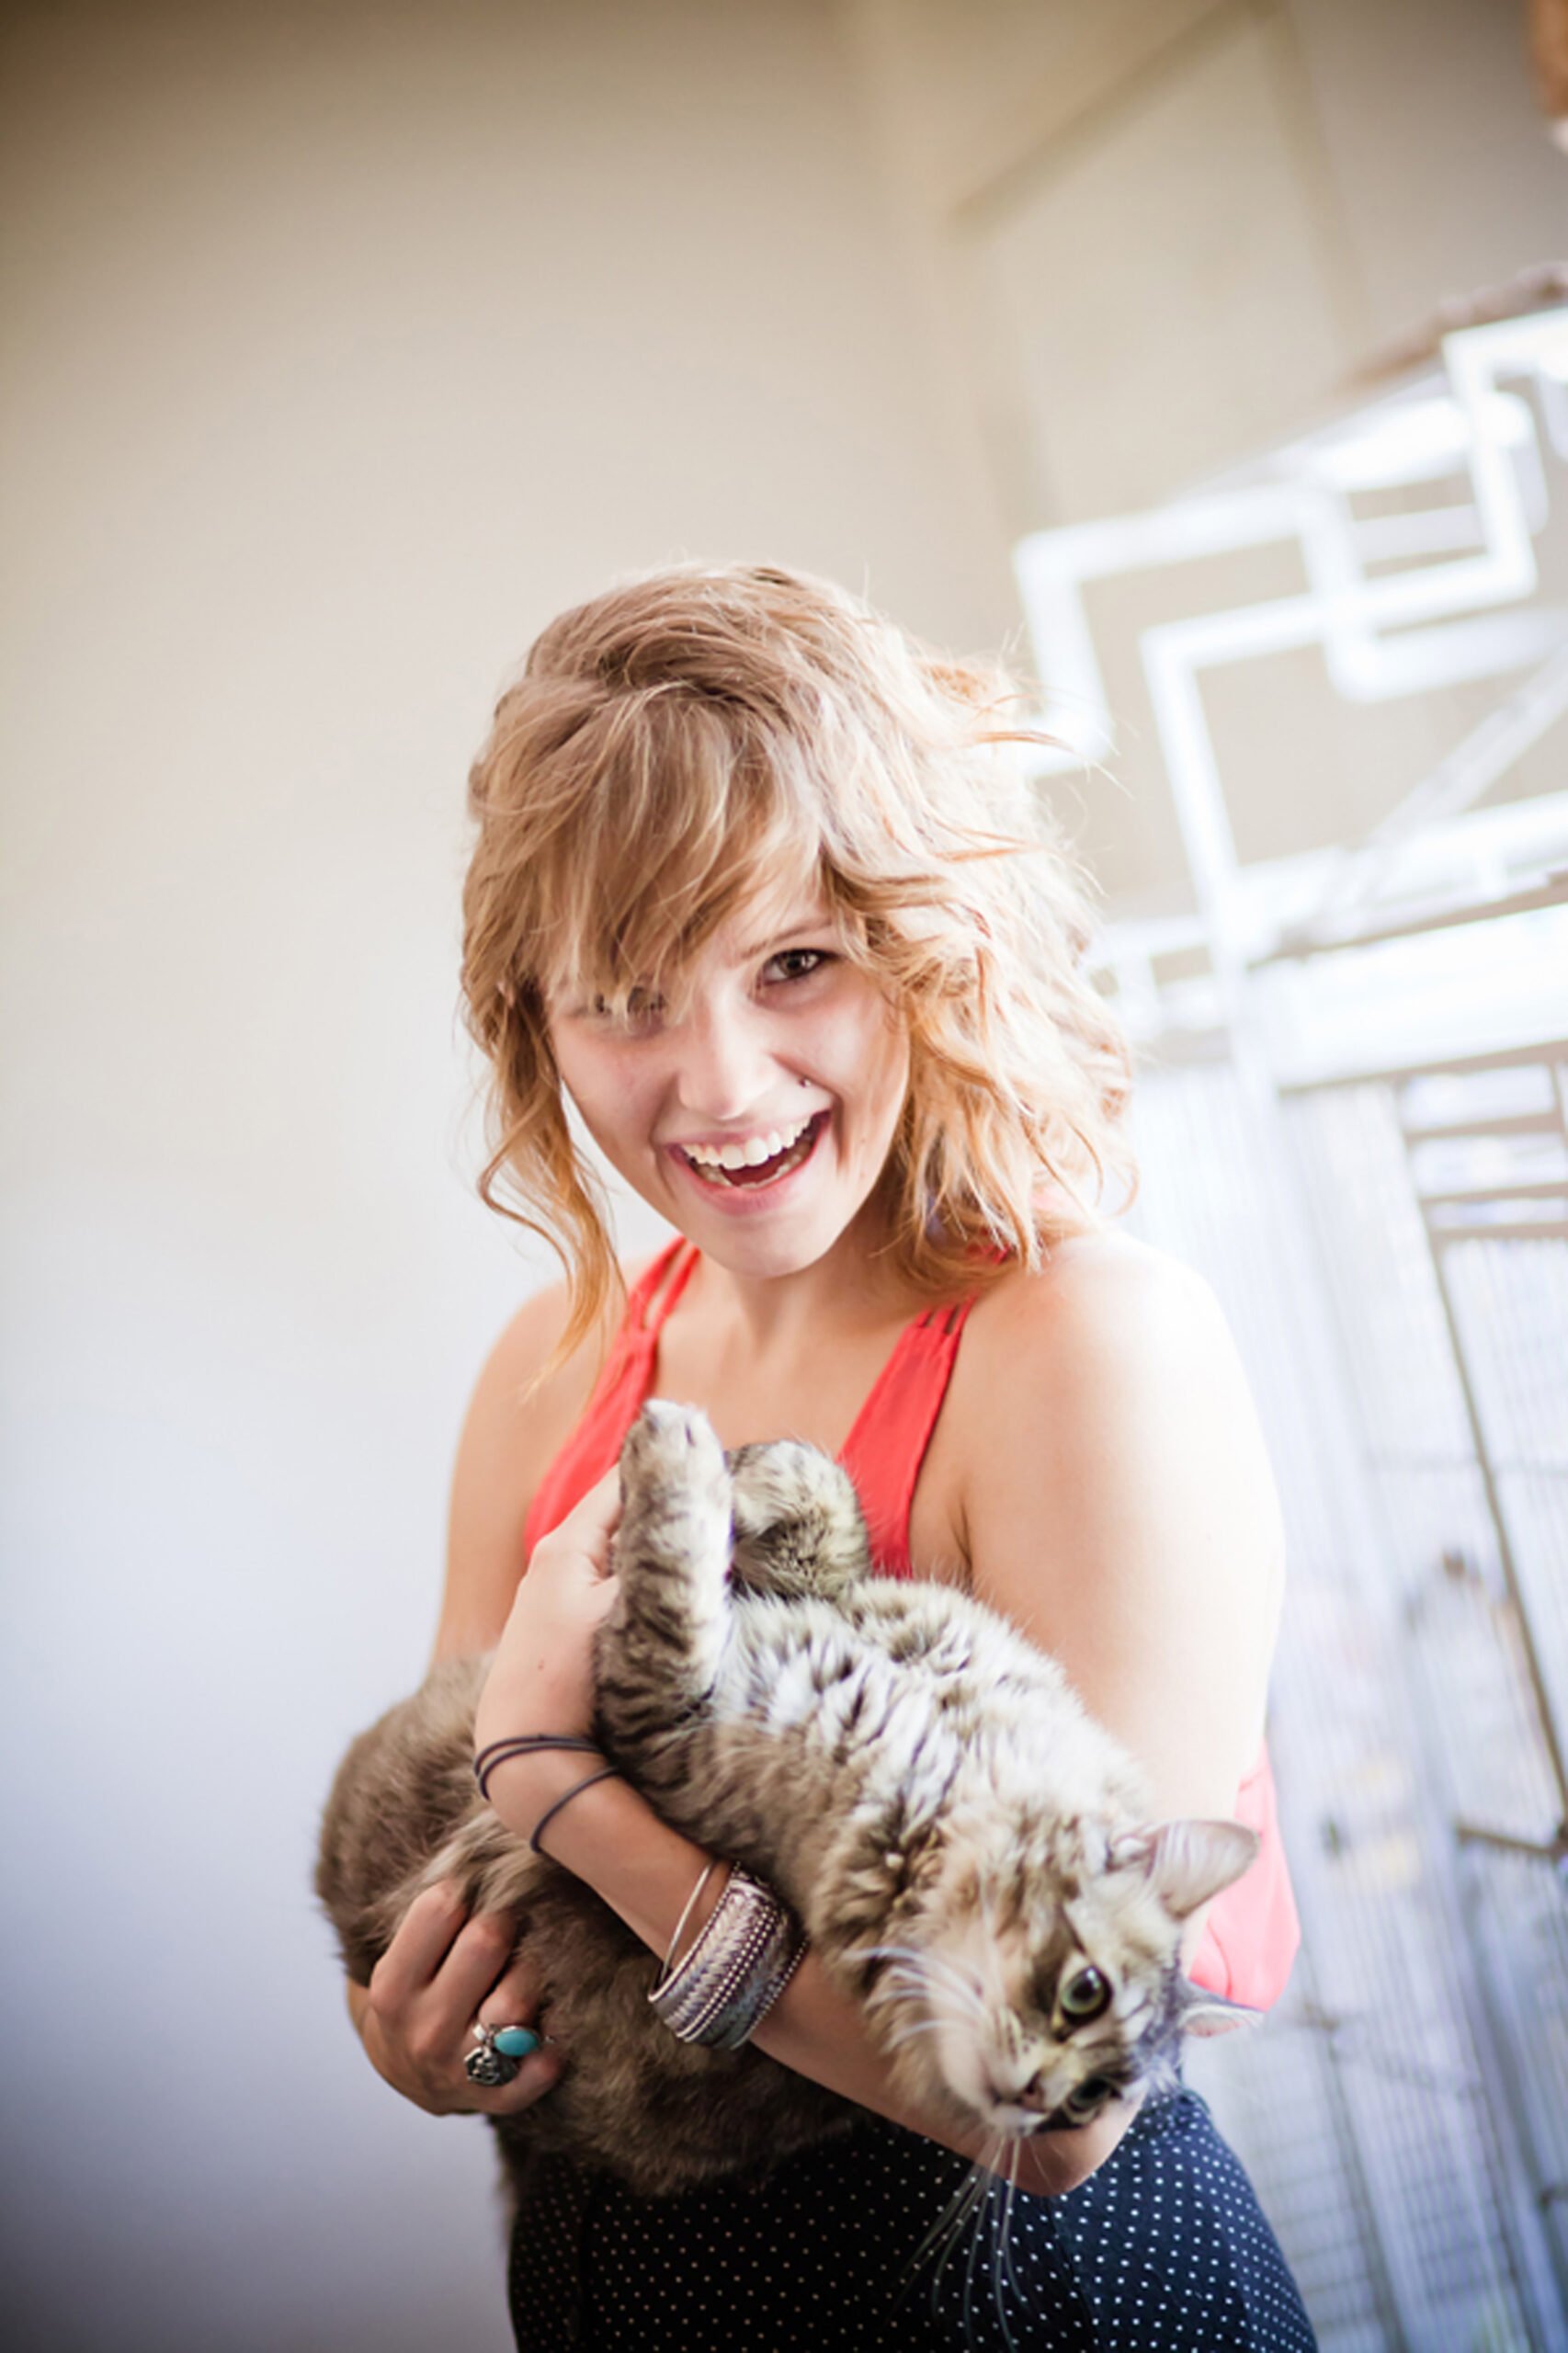 Jessica Mosher with her cat.